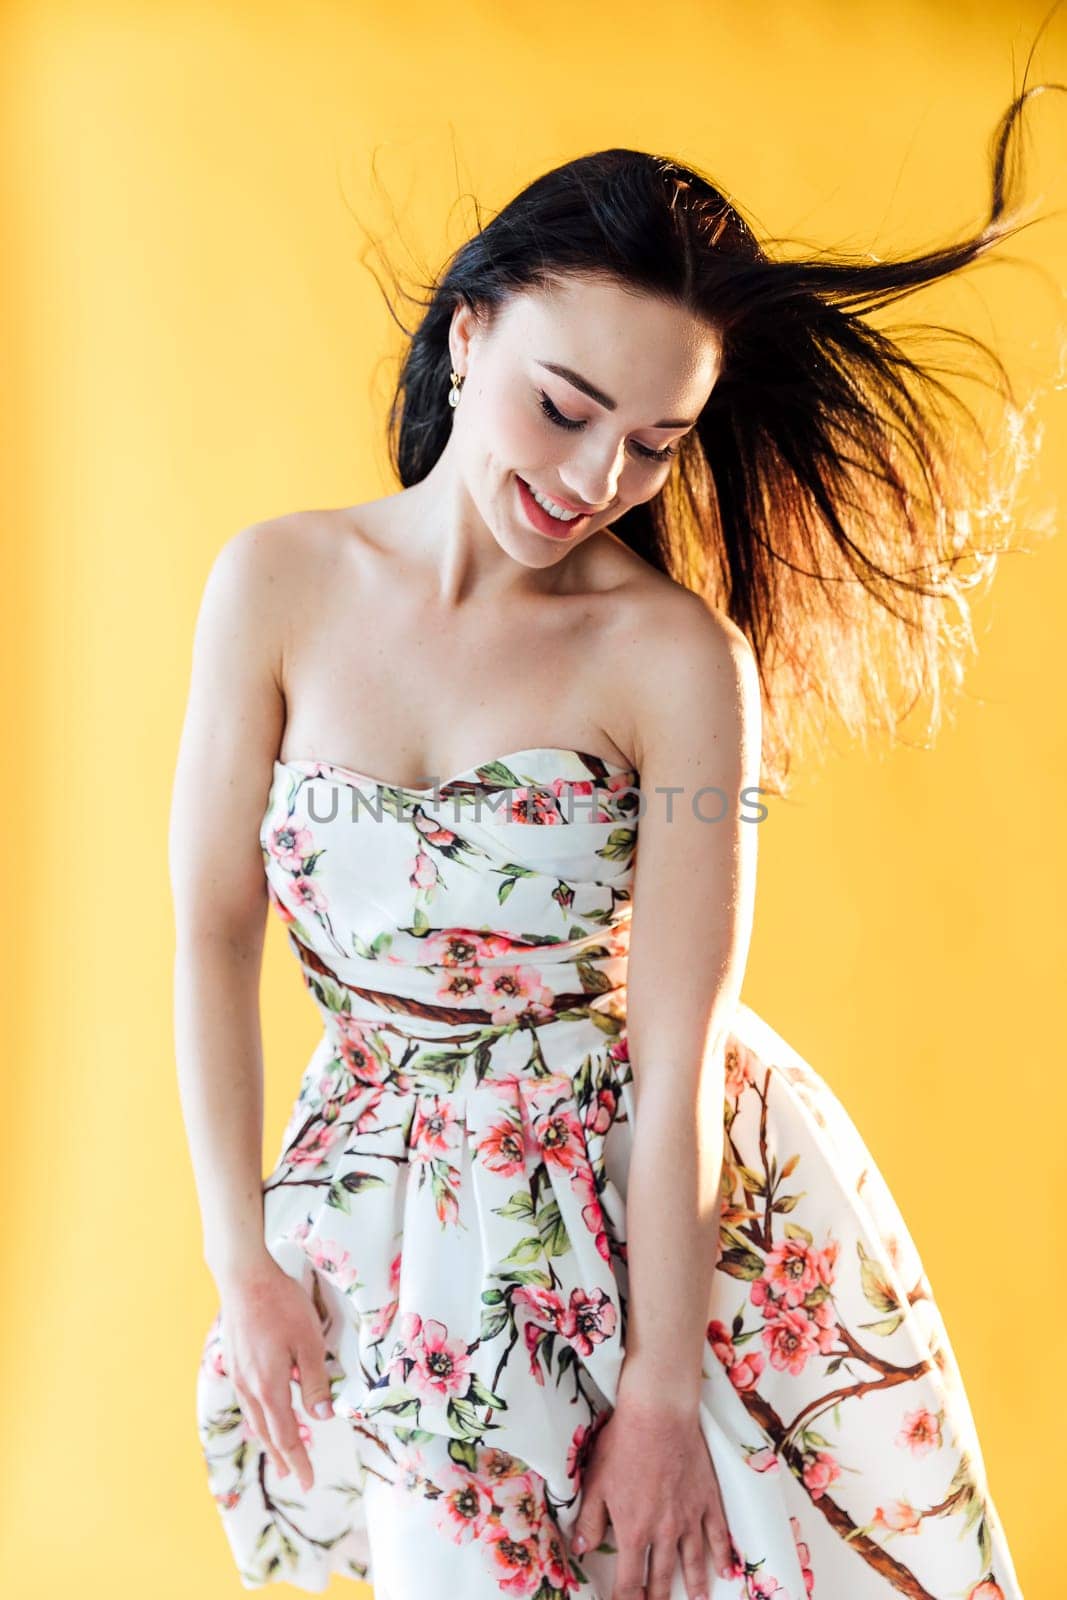 beautiful woman in floral dress posing in a bright room